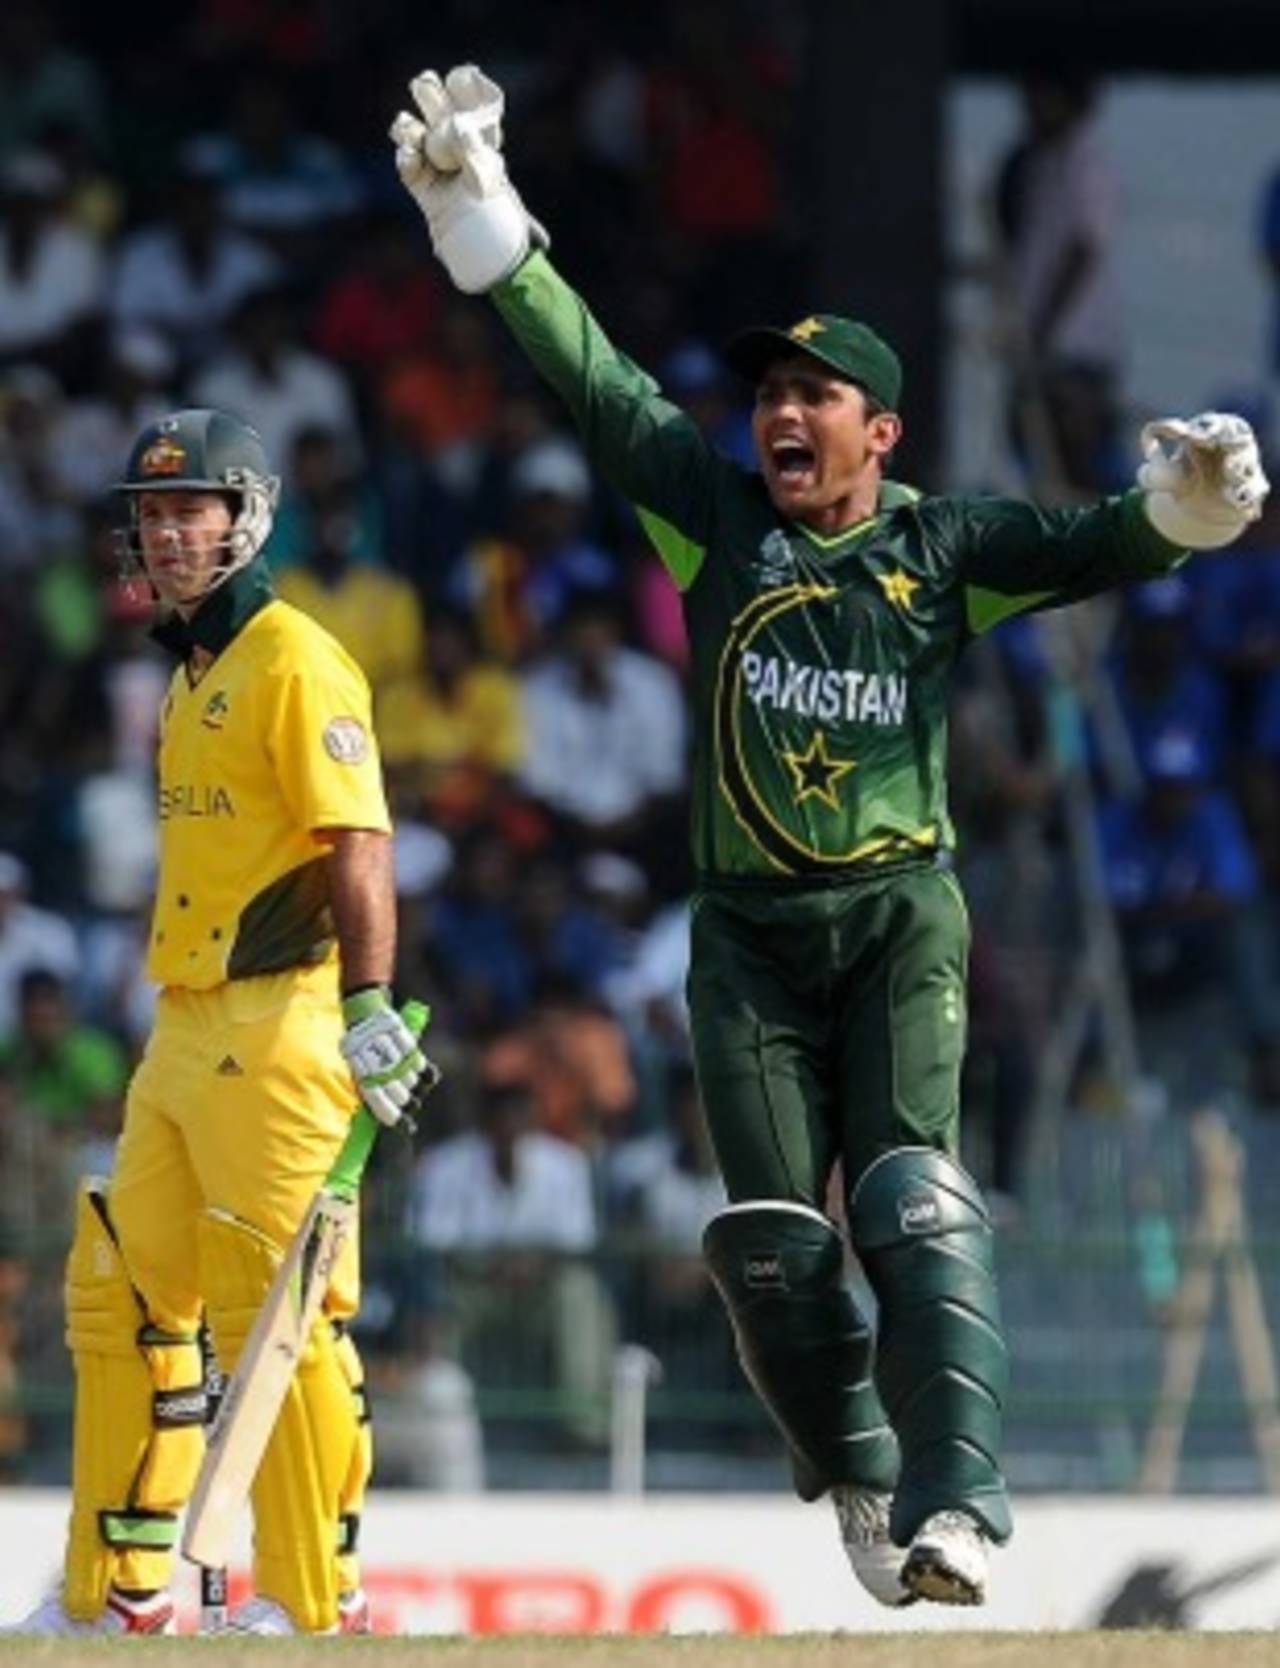 Ricky Ponting had only made 19 when he edged one behind to Kamran Akmal at the Premadasa&nbsp;&nbsp;&bull;&nbsp;&nbsp;AFP